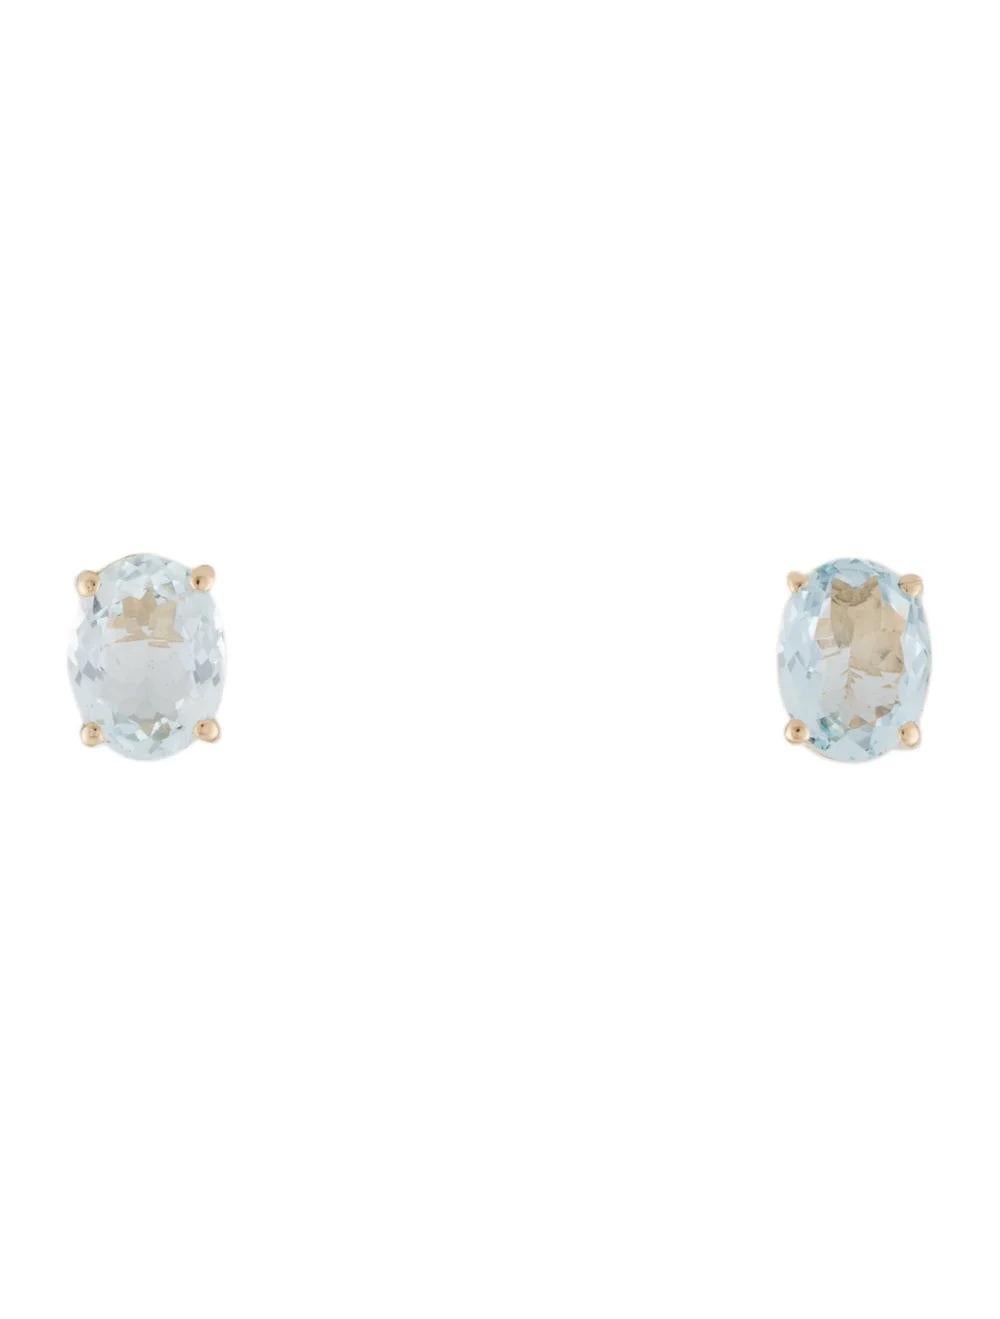 Elevate your elegance with these stunning 14K yellow gold stud earrings, featuring captivating oval aquamarines. Crafted with meticulous attention to detail, these earrings exude sophistication and timeless beauty.

Specifications:

* Metal Type: